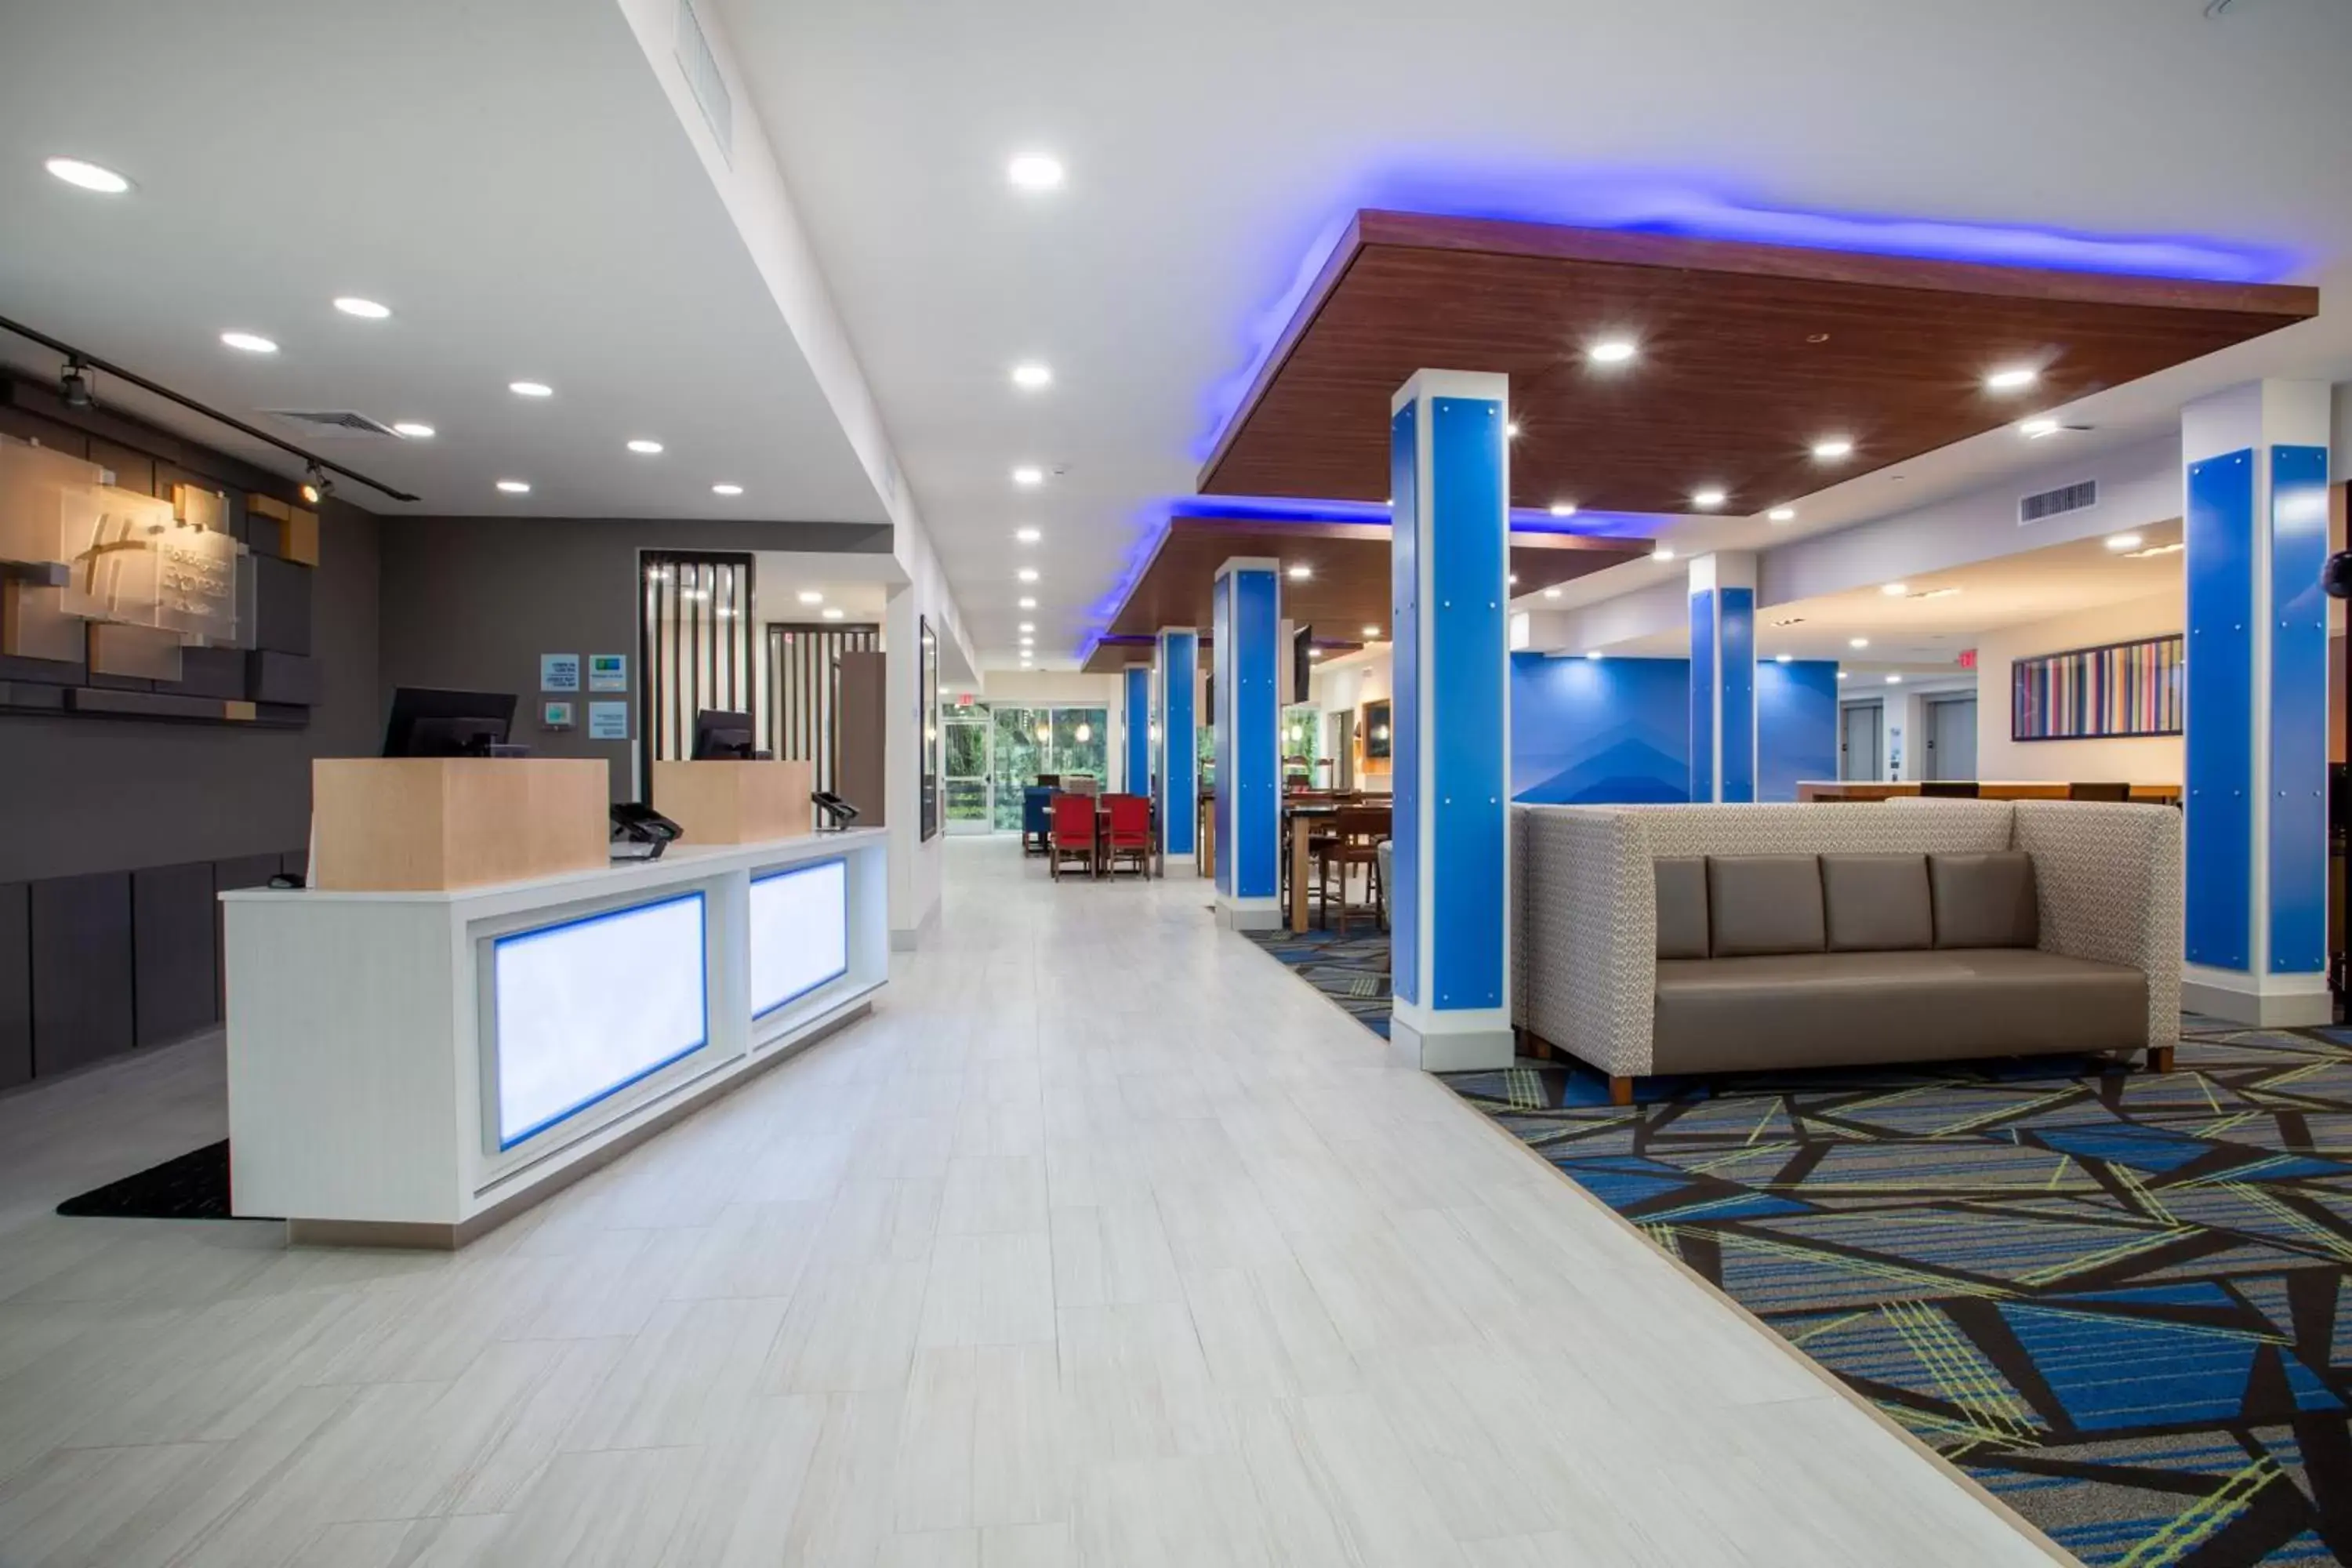 Property building in Holiday Inn Express & Suites - Deland South, an IHG Hotel